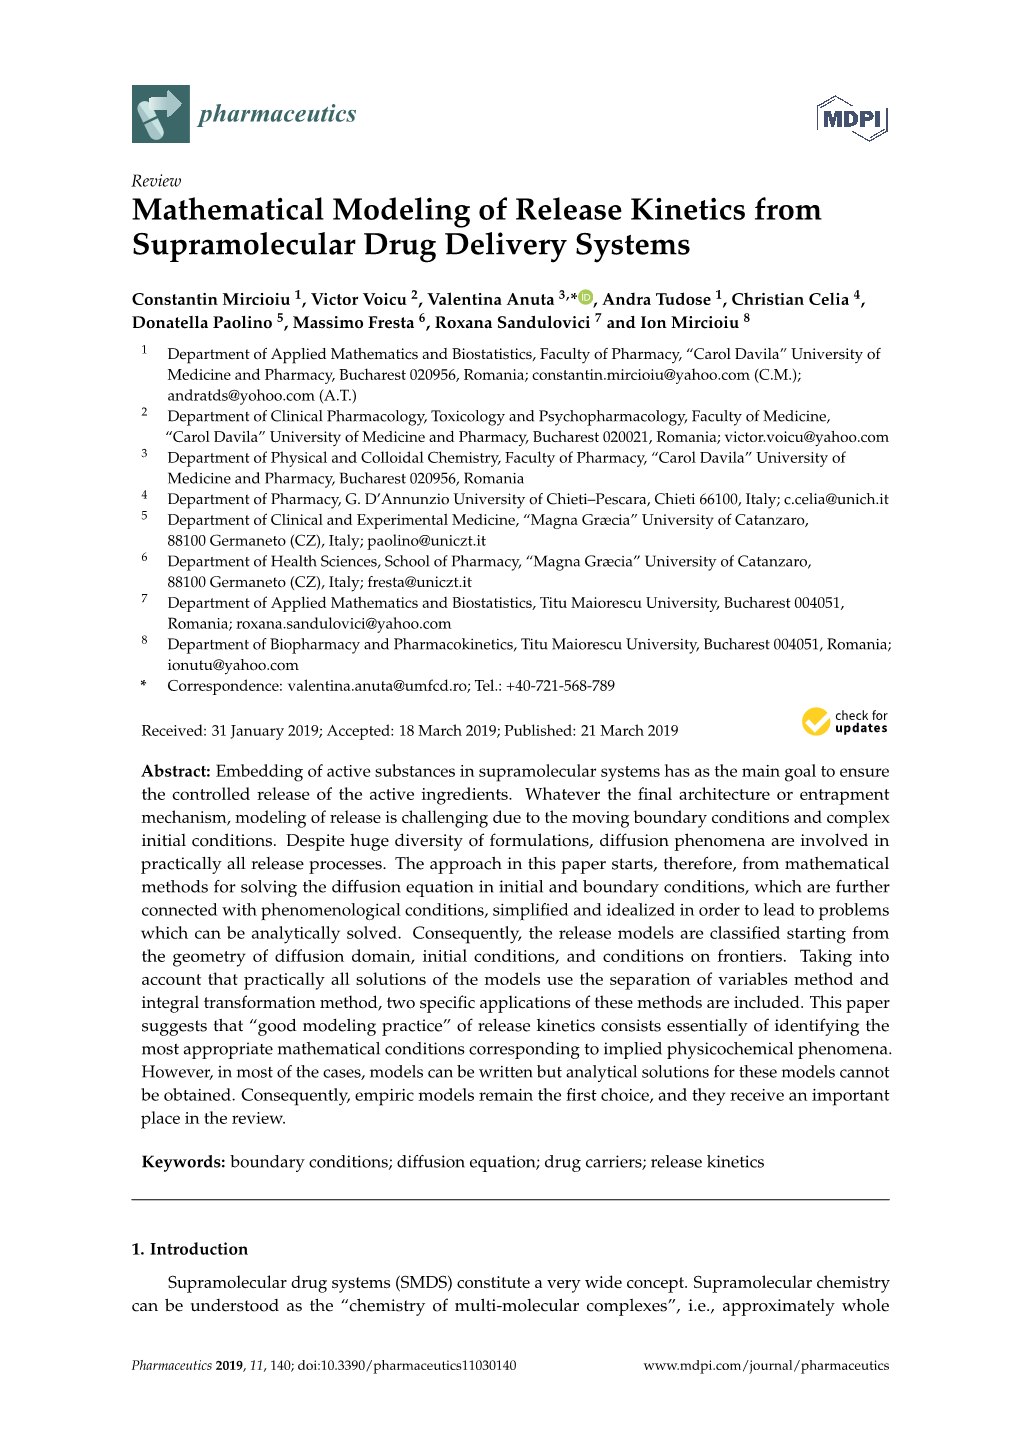 Mathematical Modeling of Release Kinetics from Supramolecular Drug Delivery Systems